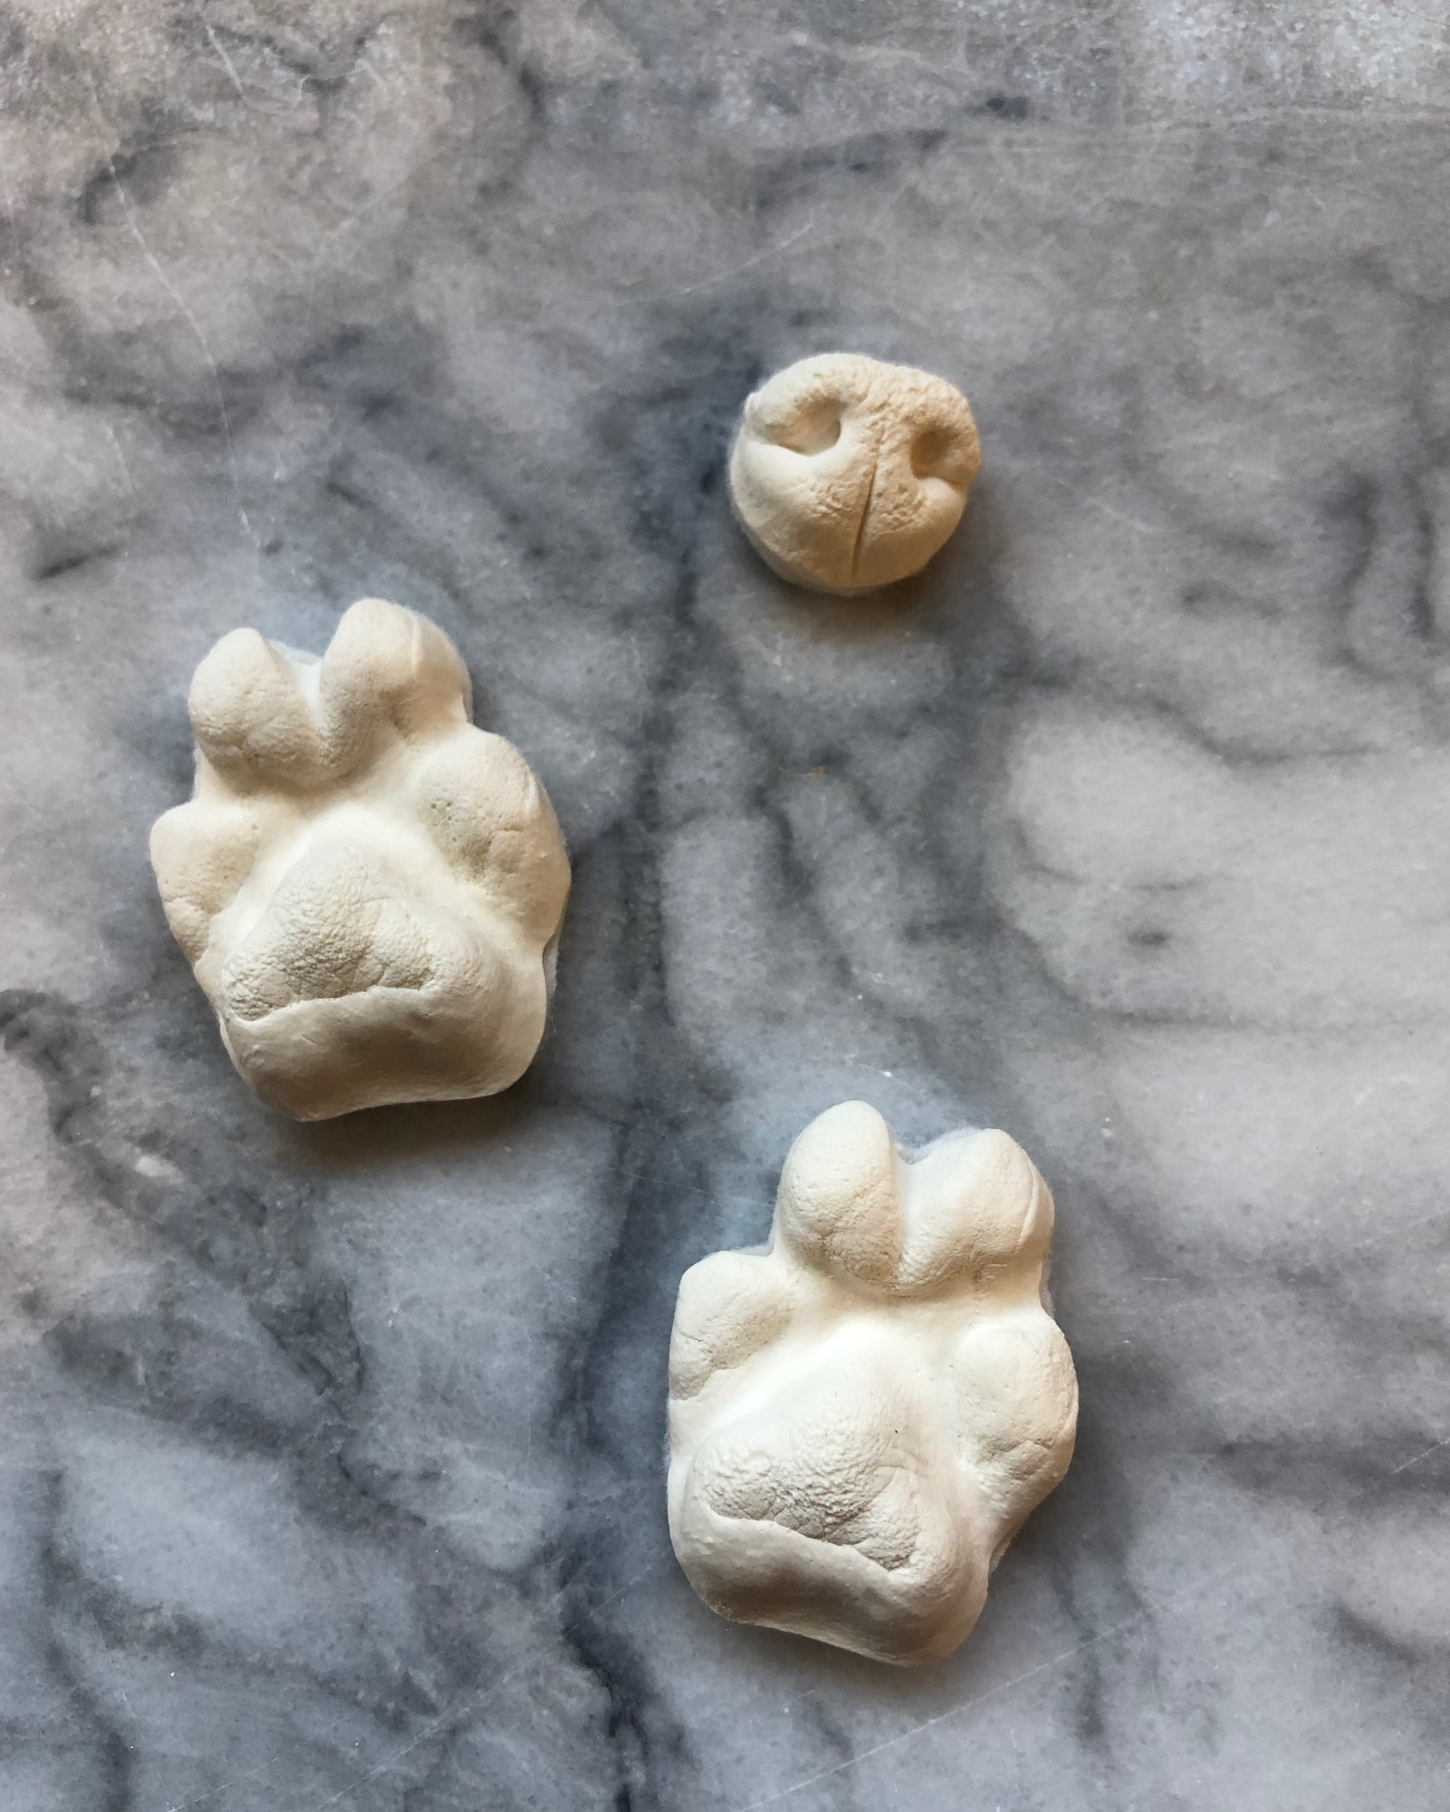 Two cast dog paws and a cast dog nose